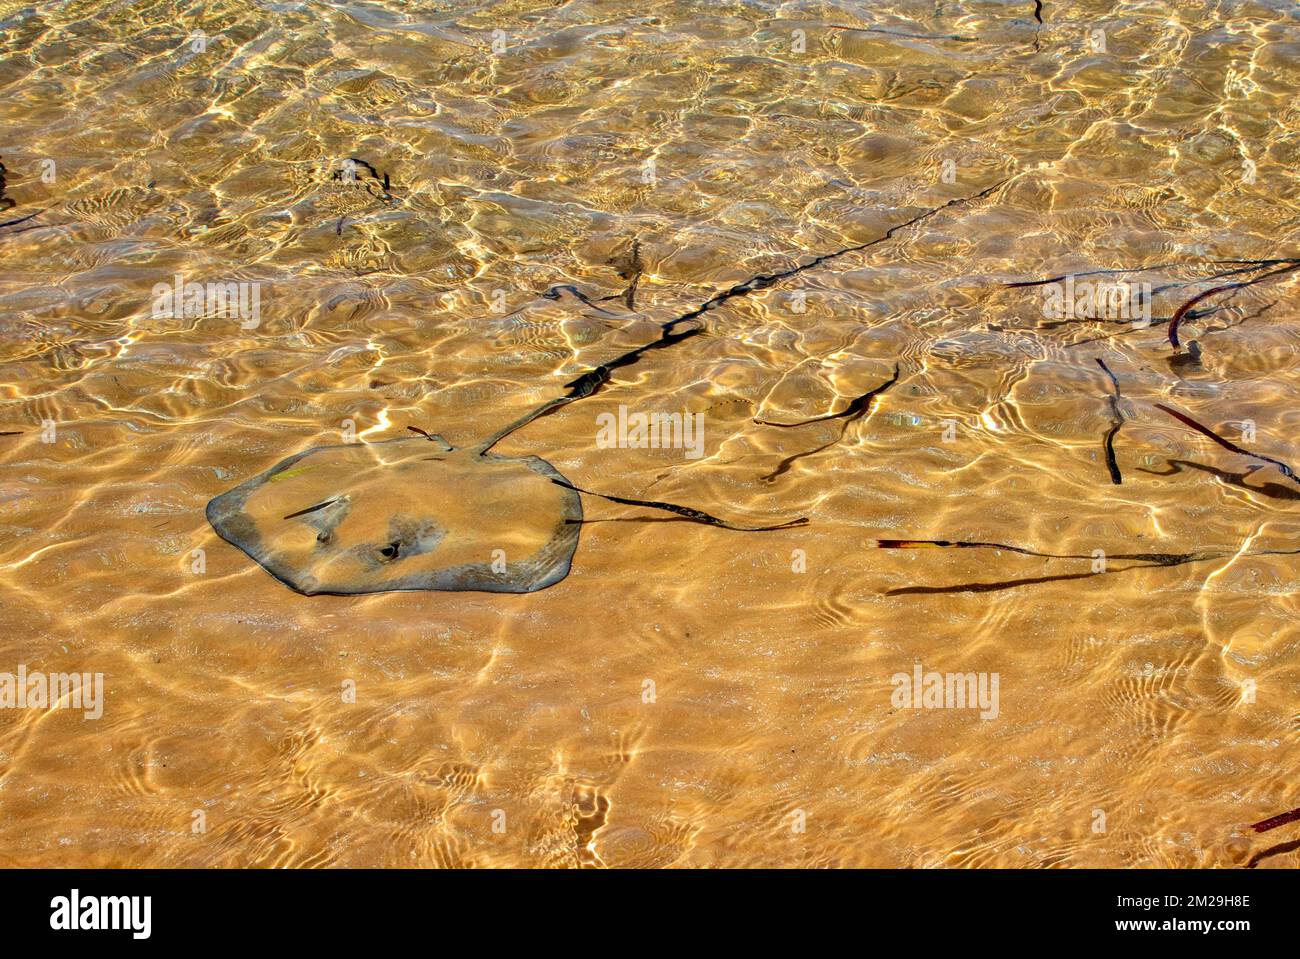 Spotted whiptail ray in Big Lagoon, Francois Peron National Park Stock Photo